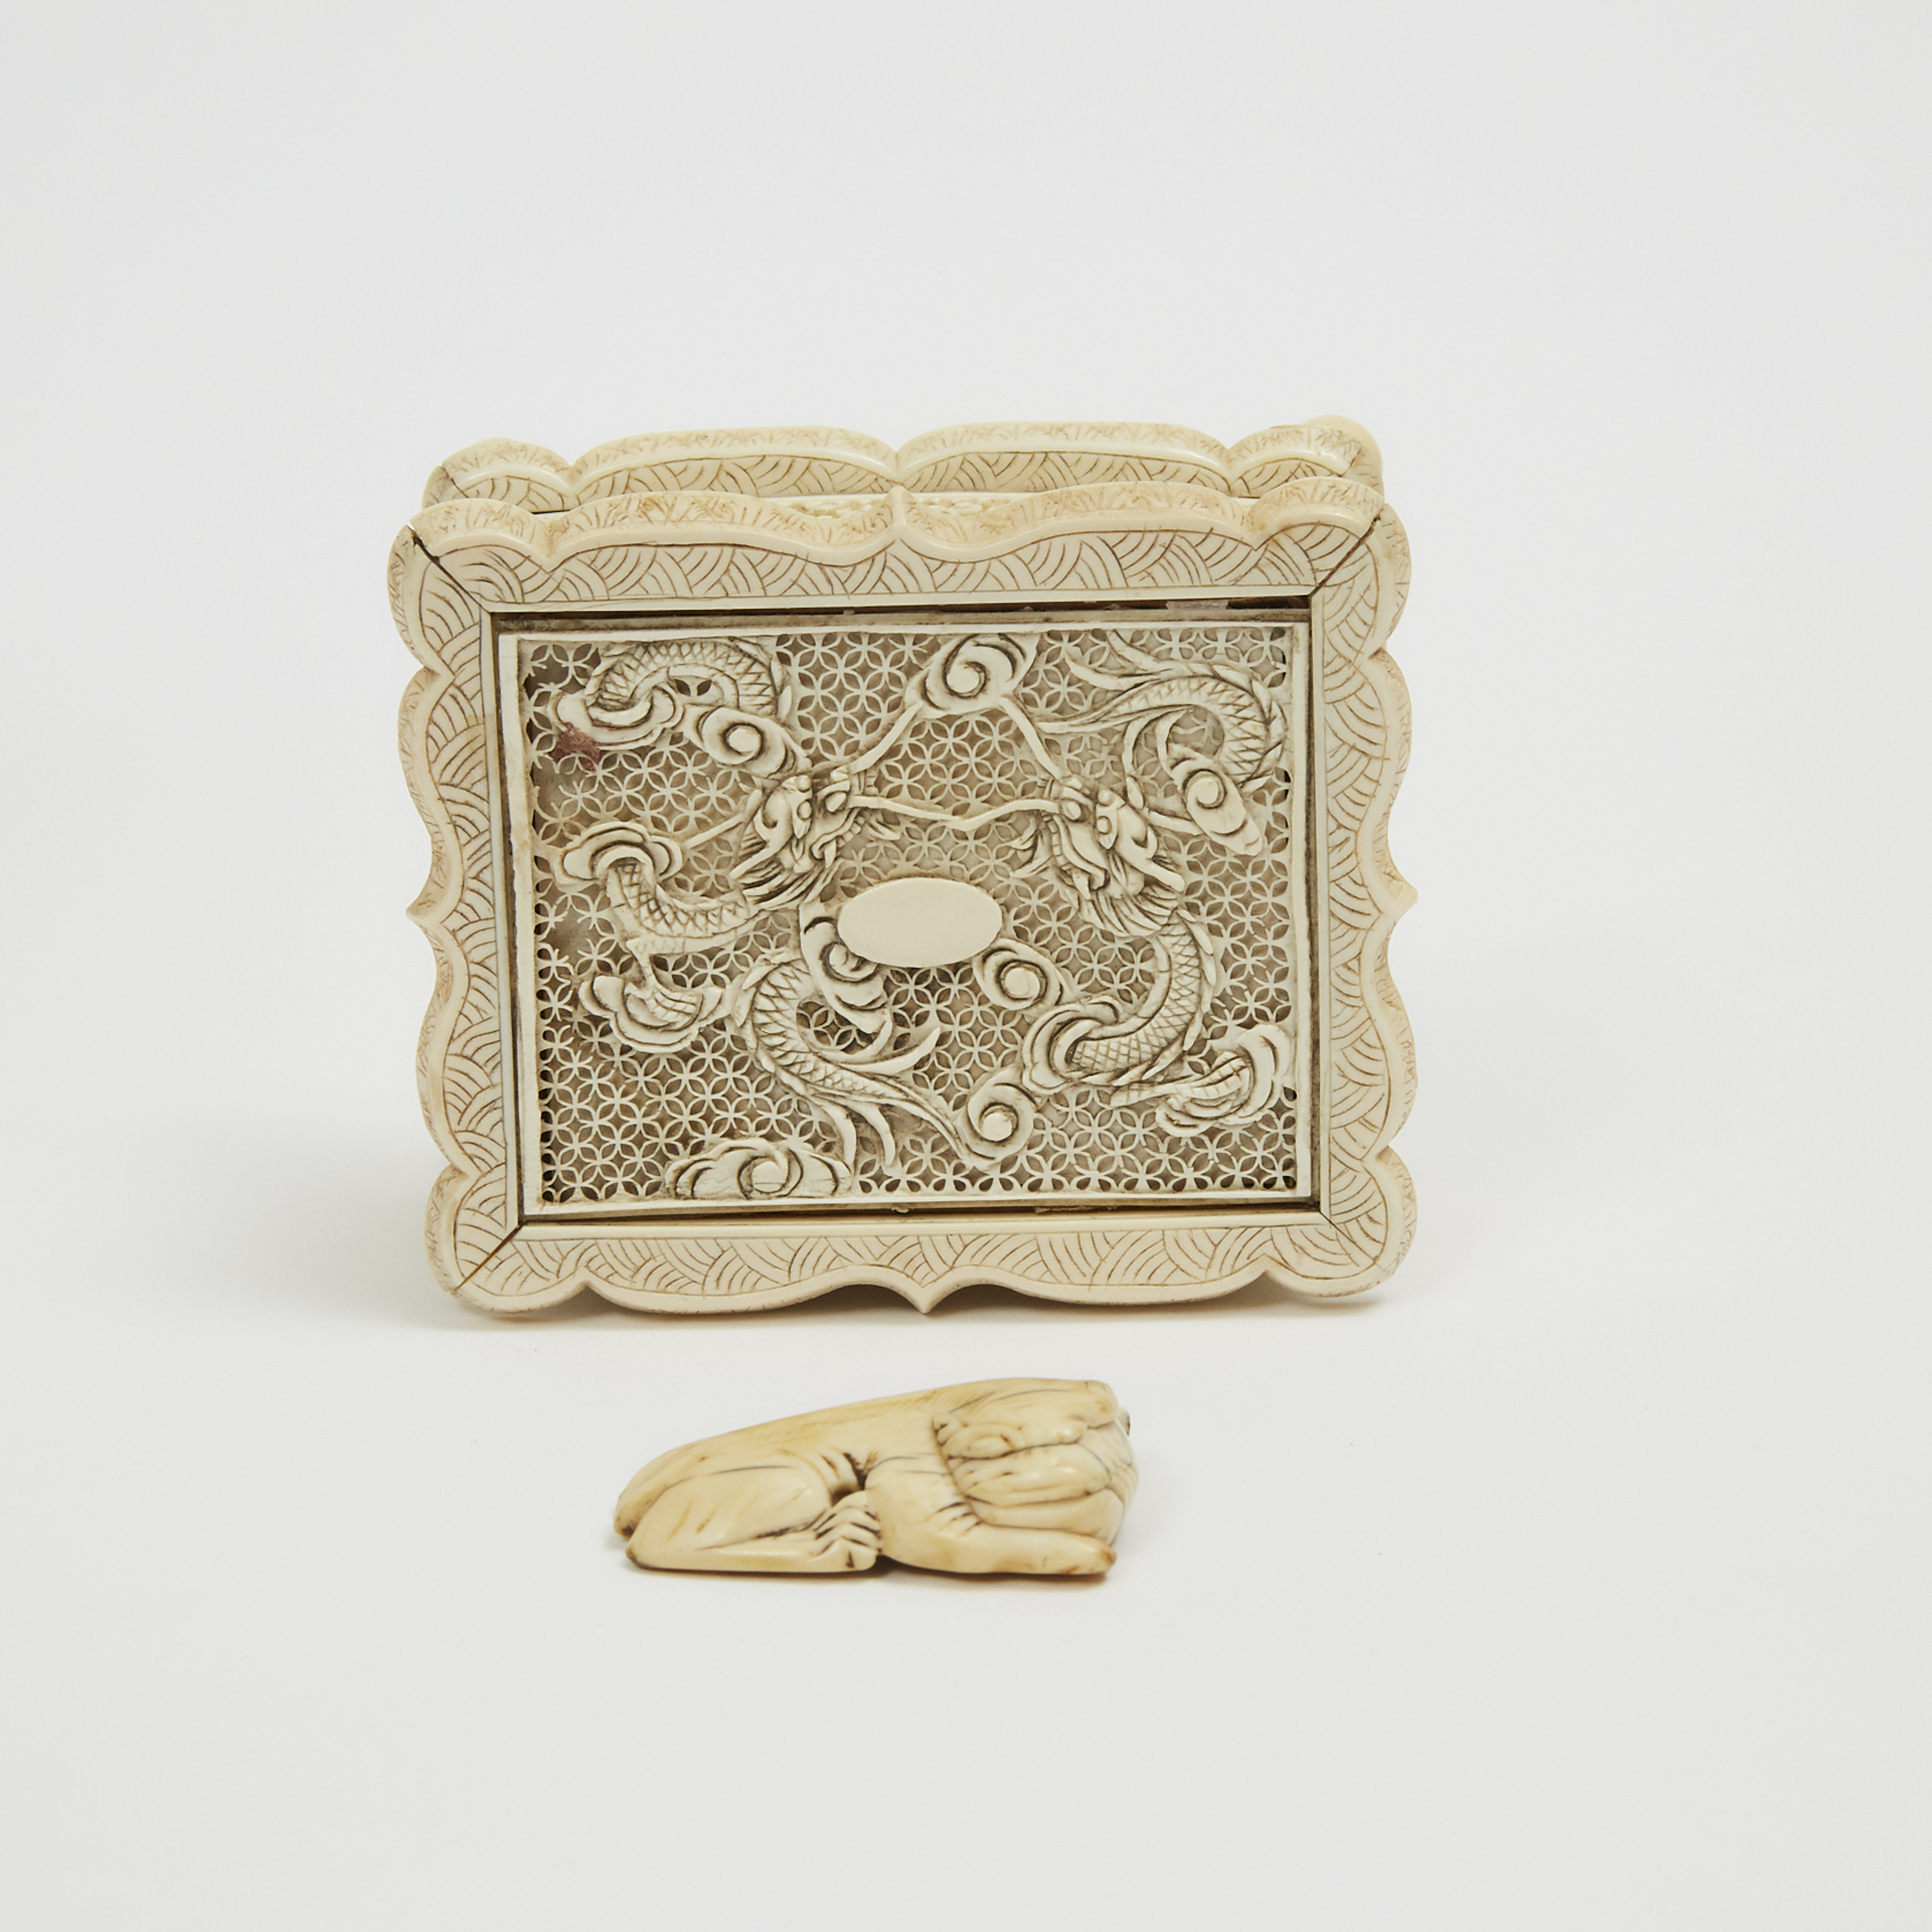 A Chinese Ivory Puzzle Ball, Jewellery Box, and Toggle, 19th/Early 20th Century